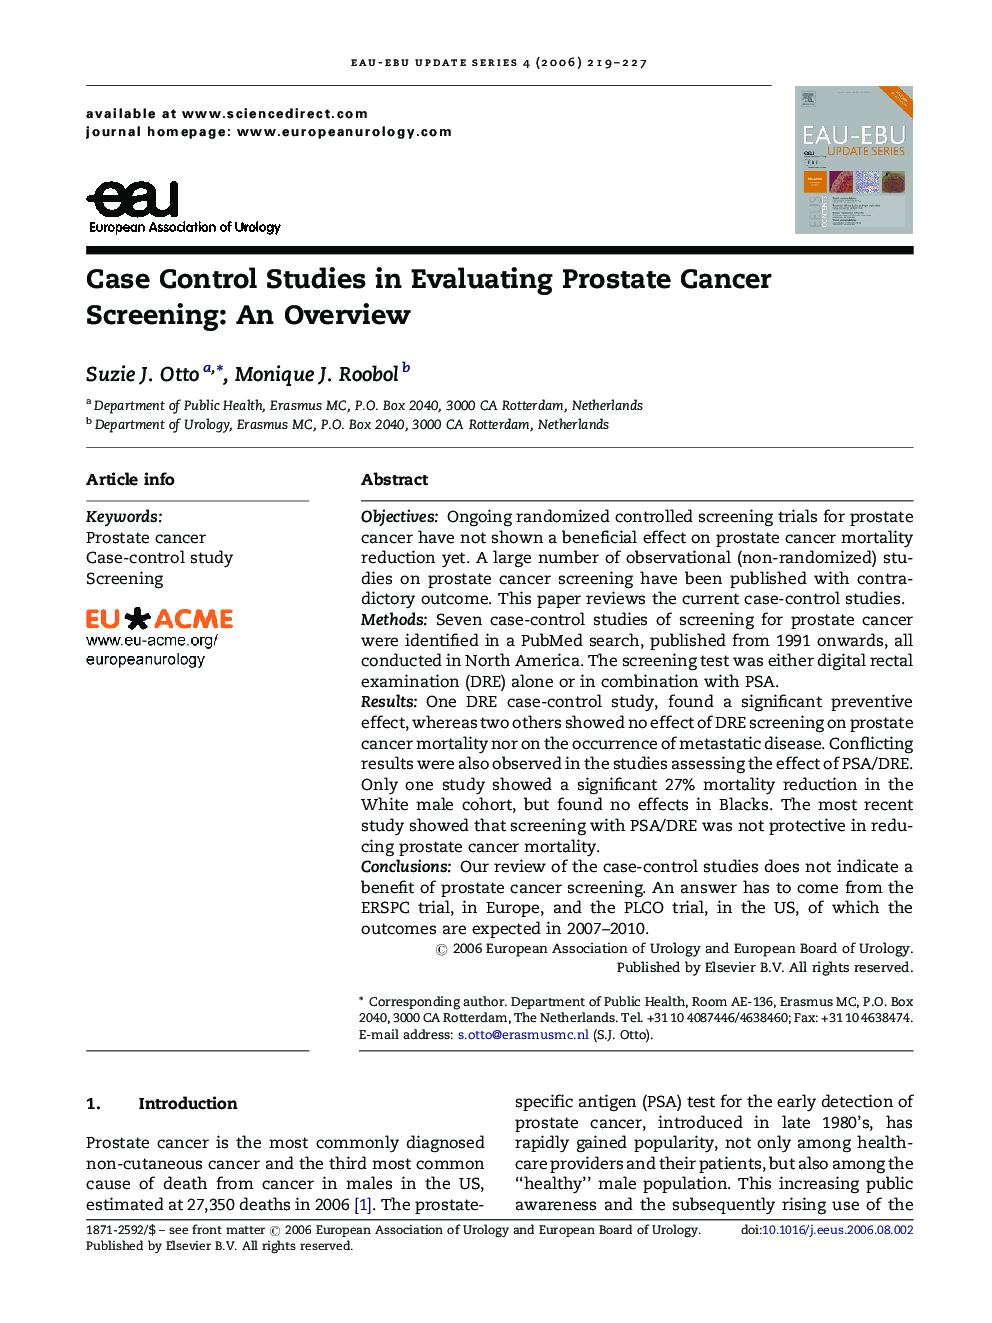 Case Control Studies in Evaluating Prostate Cancer Screening: An Overview